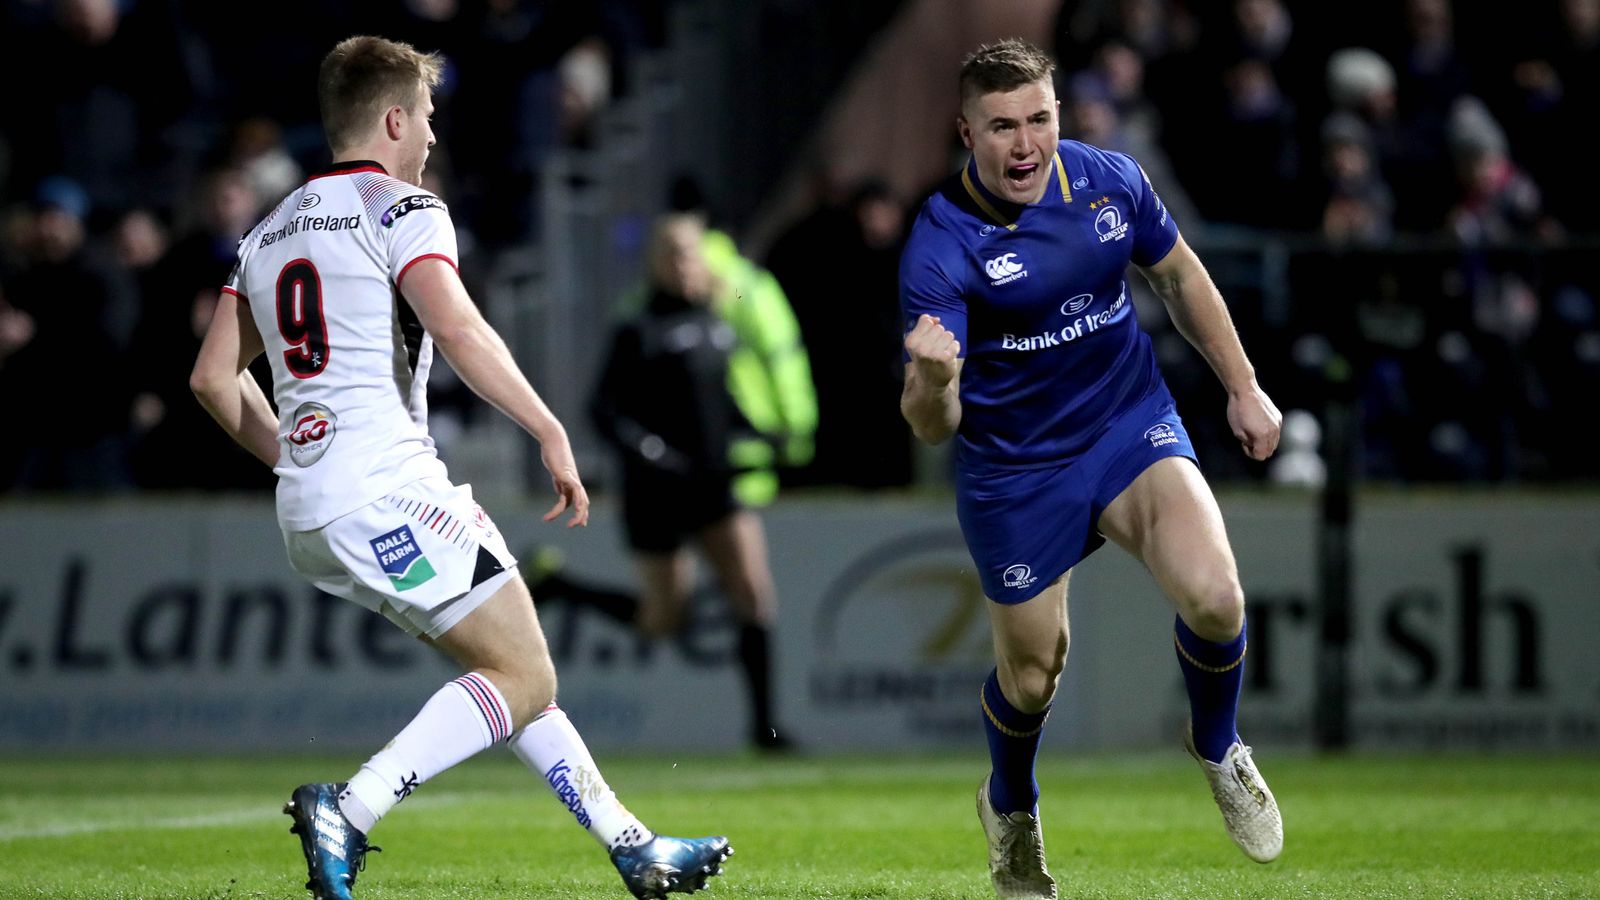 Leinster 38 - 7 Ulster